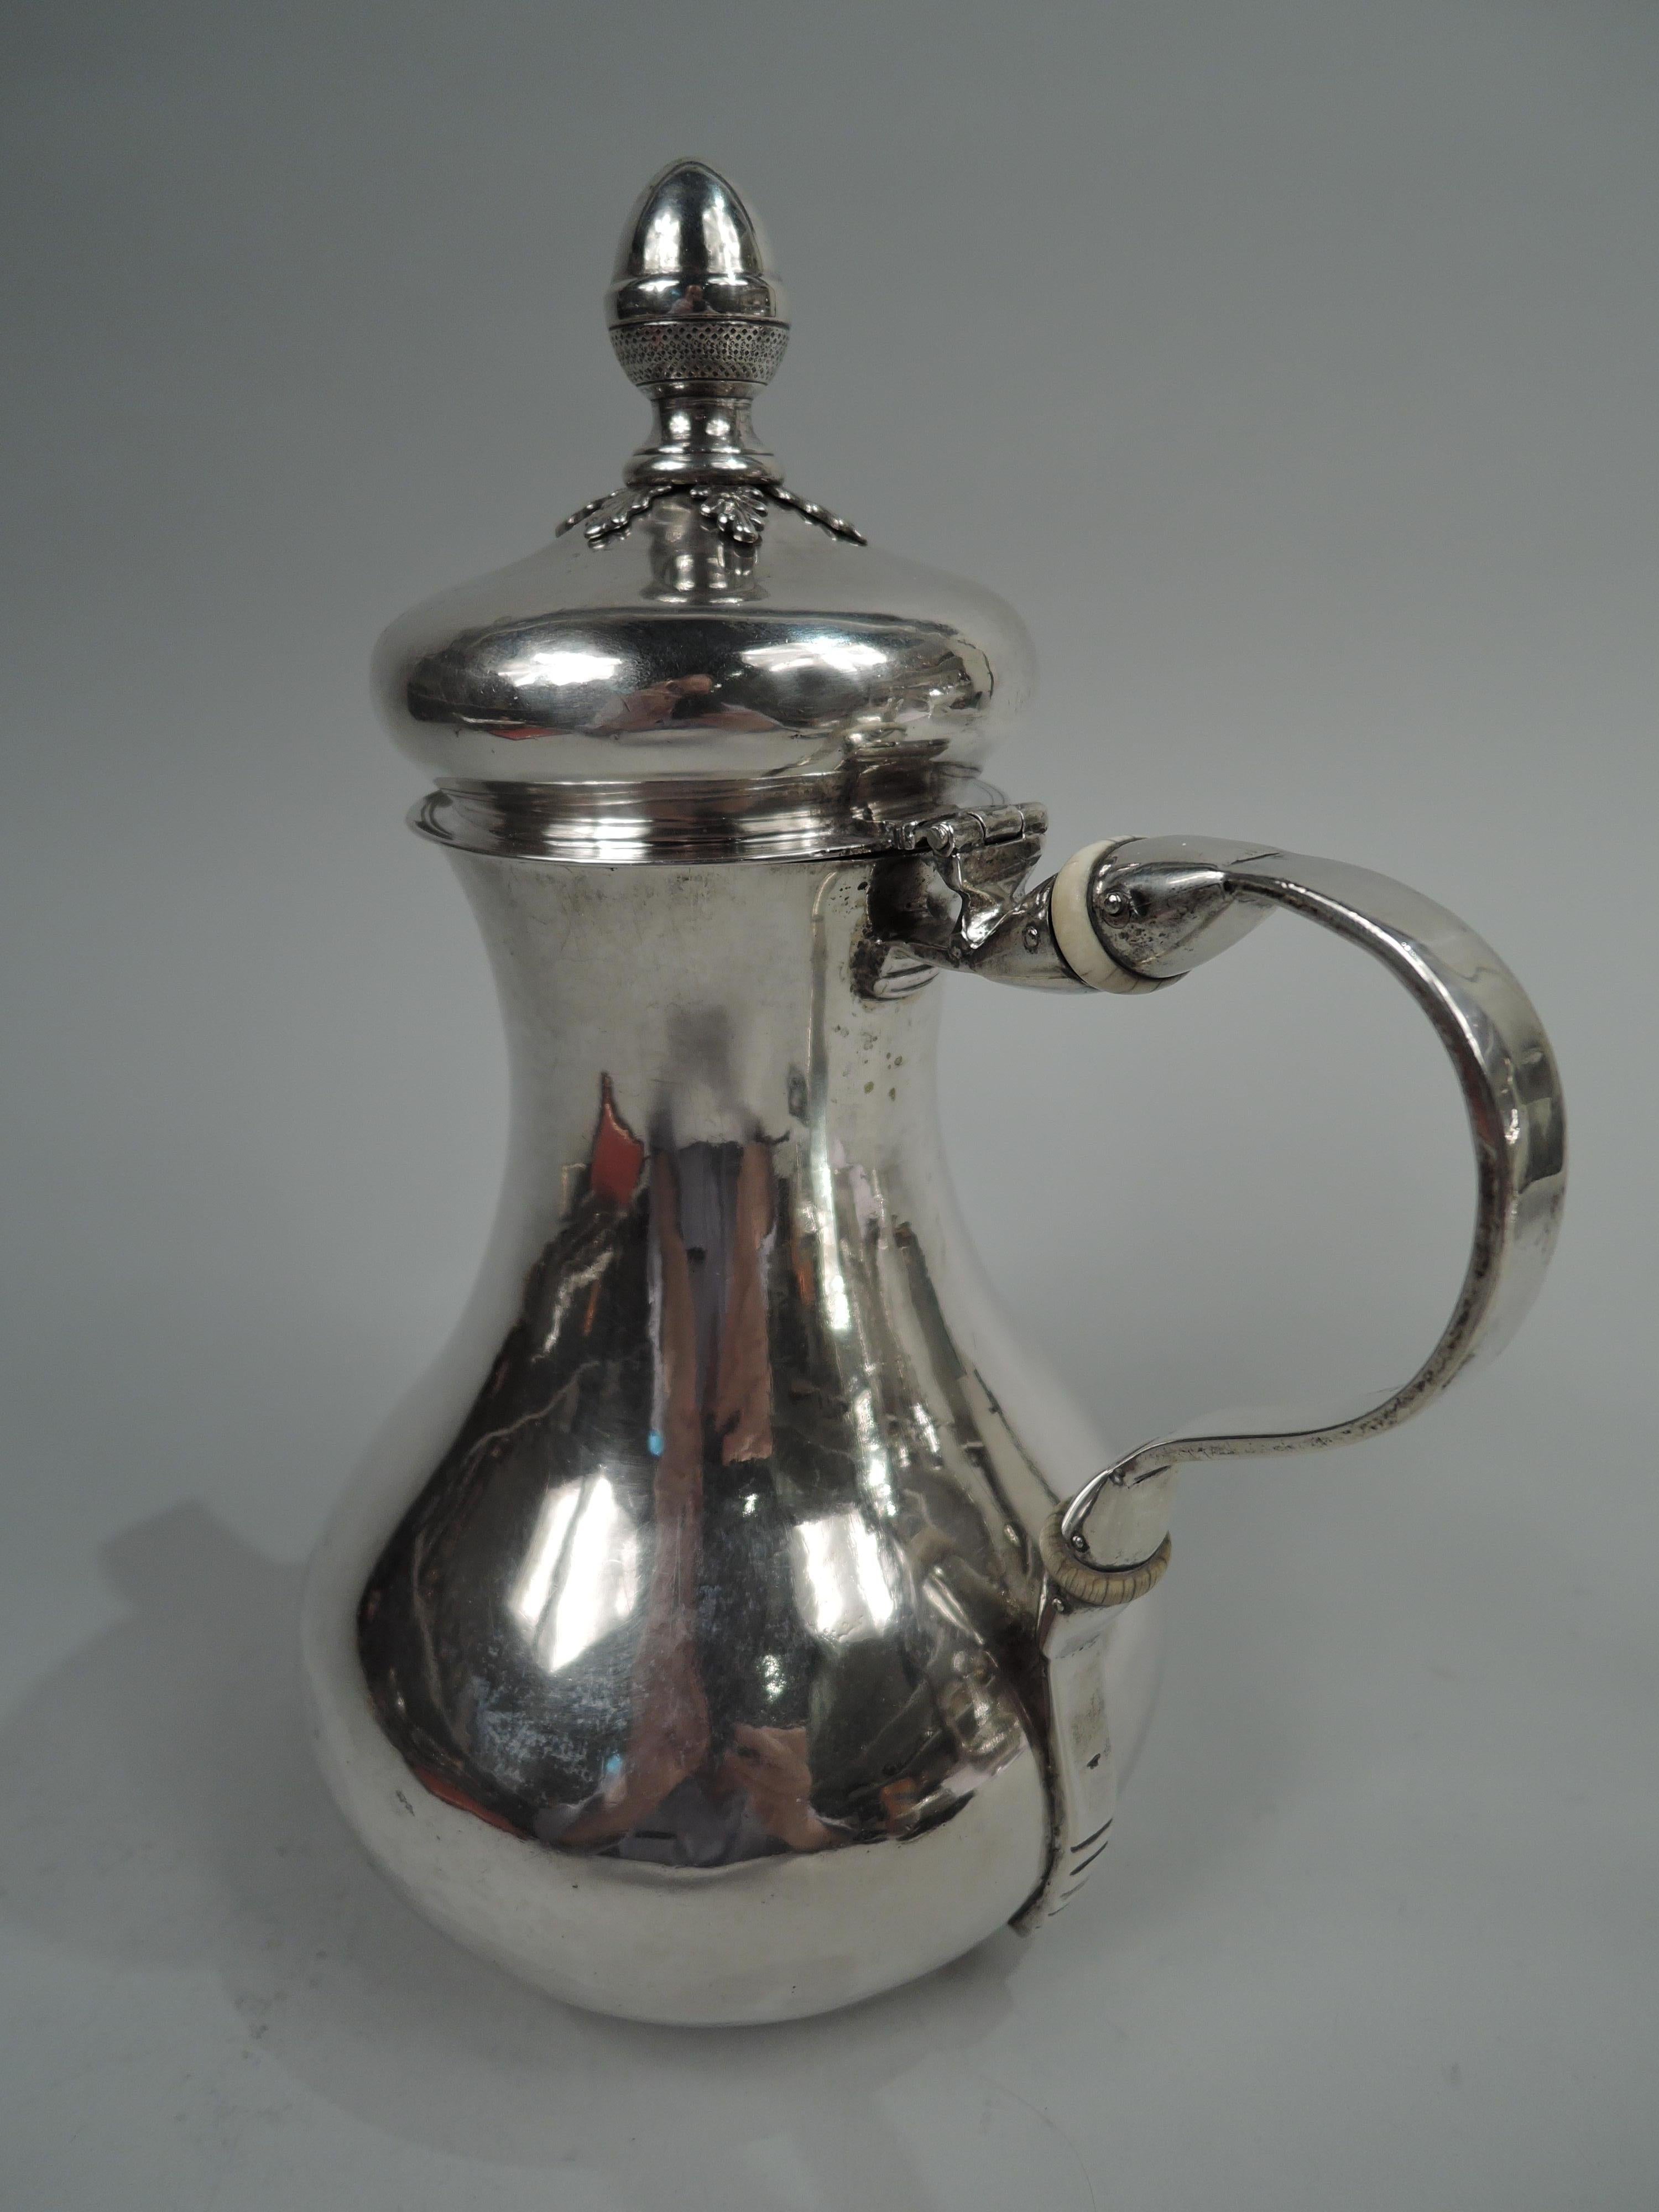 Italian Neoclassical silver coffeepot, ca 1820. Baluster; cover hinged and domed with leaf-mounted acorn finial. Applied c-scroll spout and scroll handle with ribbed tail. Handwork visible on interior. Marked. Weight: 25.4 troy ounces.  